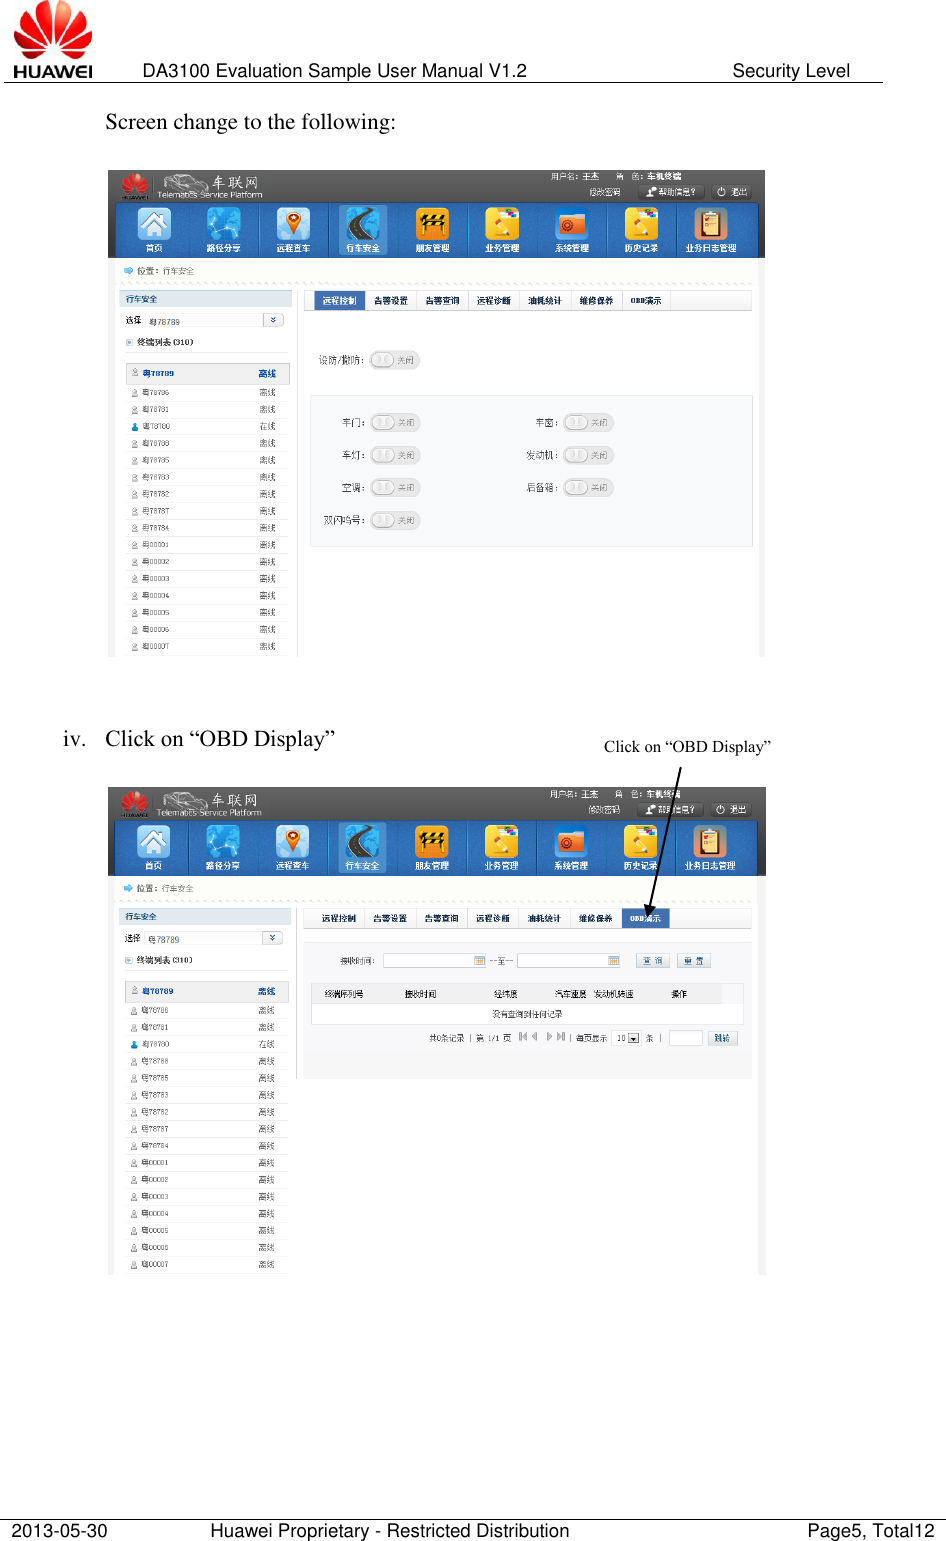   DA3100 Evaluation Sample User Manual V1.2 Security Level  2013-05-30 Huawei Proprietary - Restricted Distribution Page5, Total12  Screen change to the following:     iv. Click on “OBD Display”          Click on “OBD Display” 